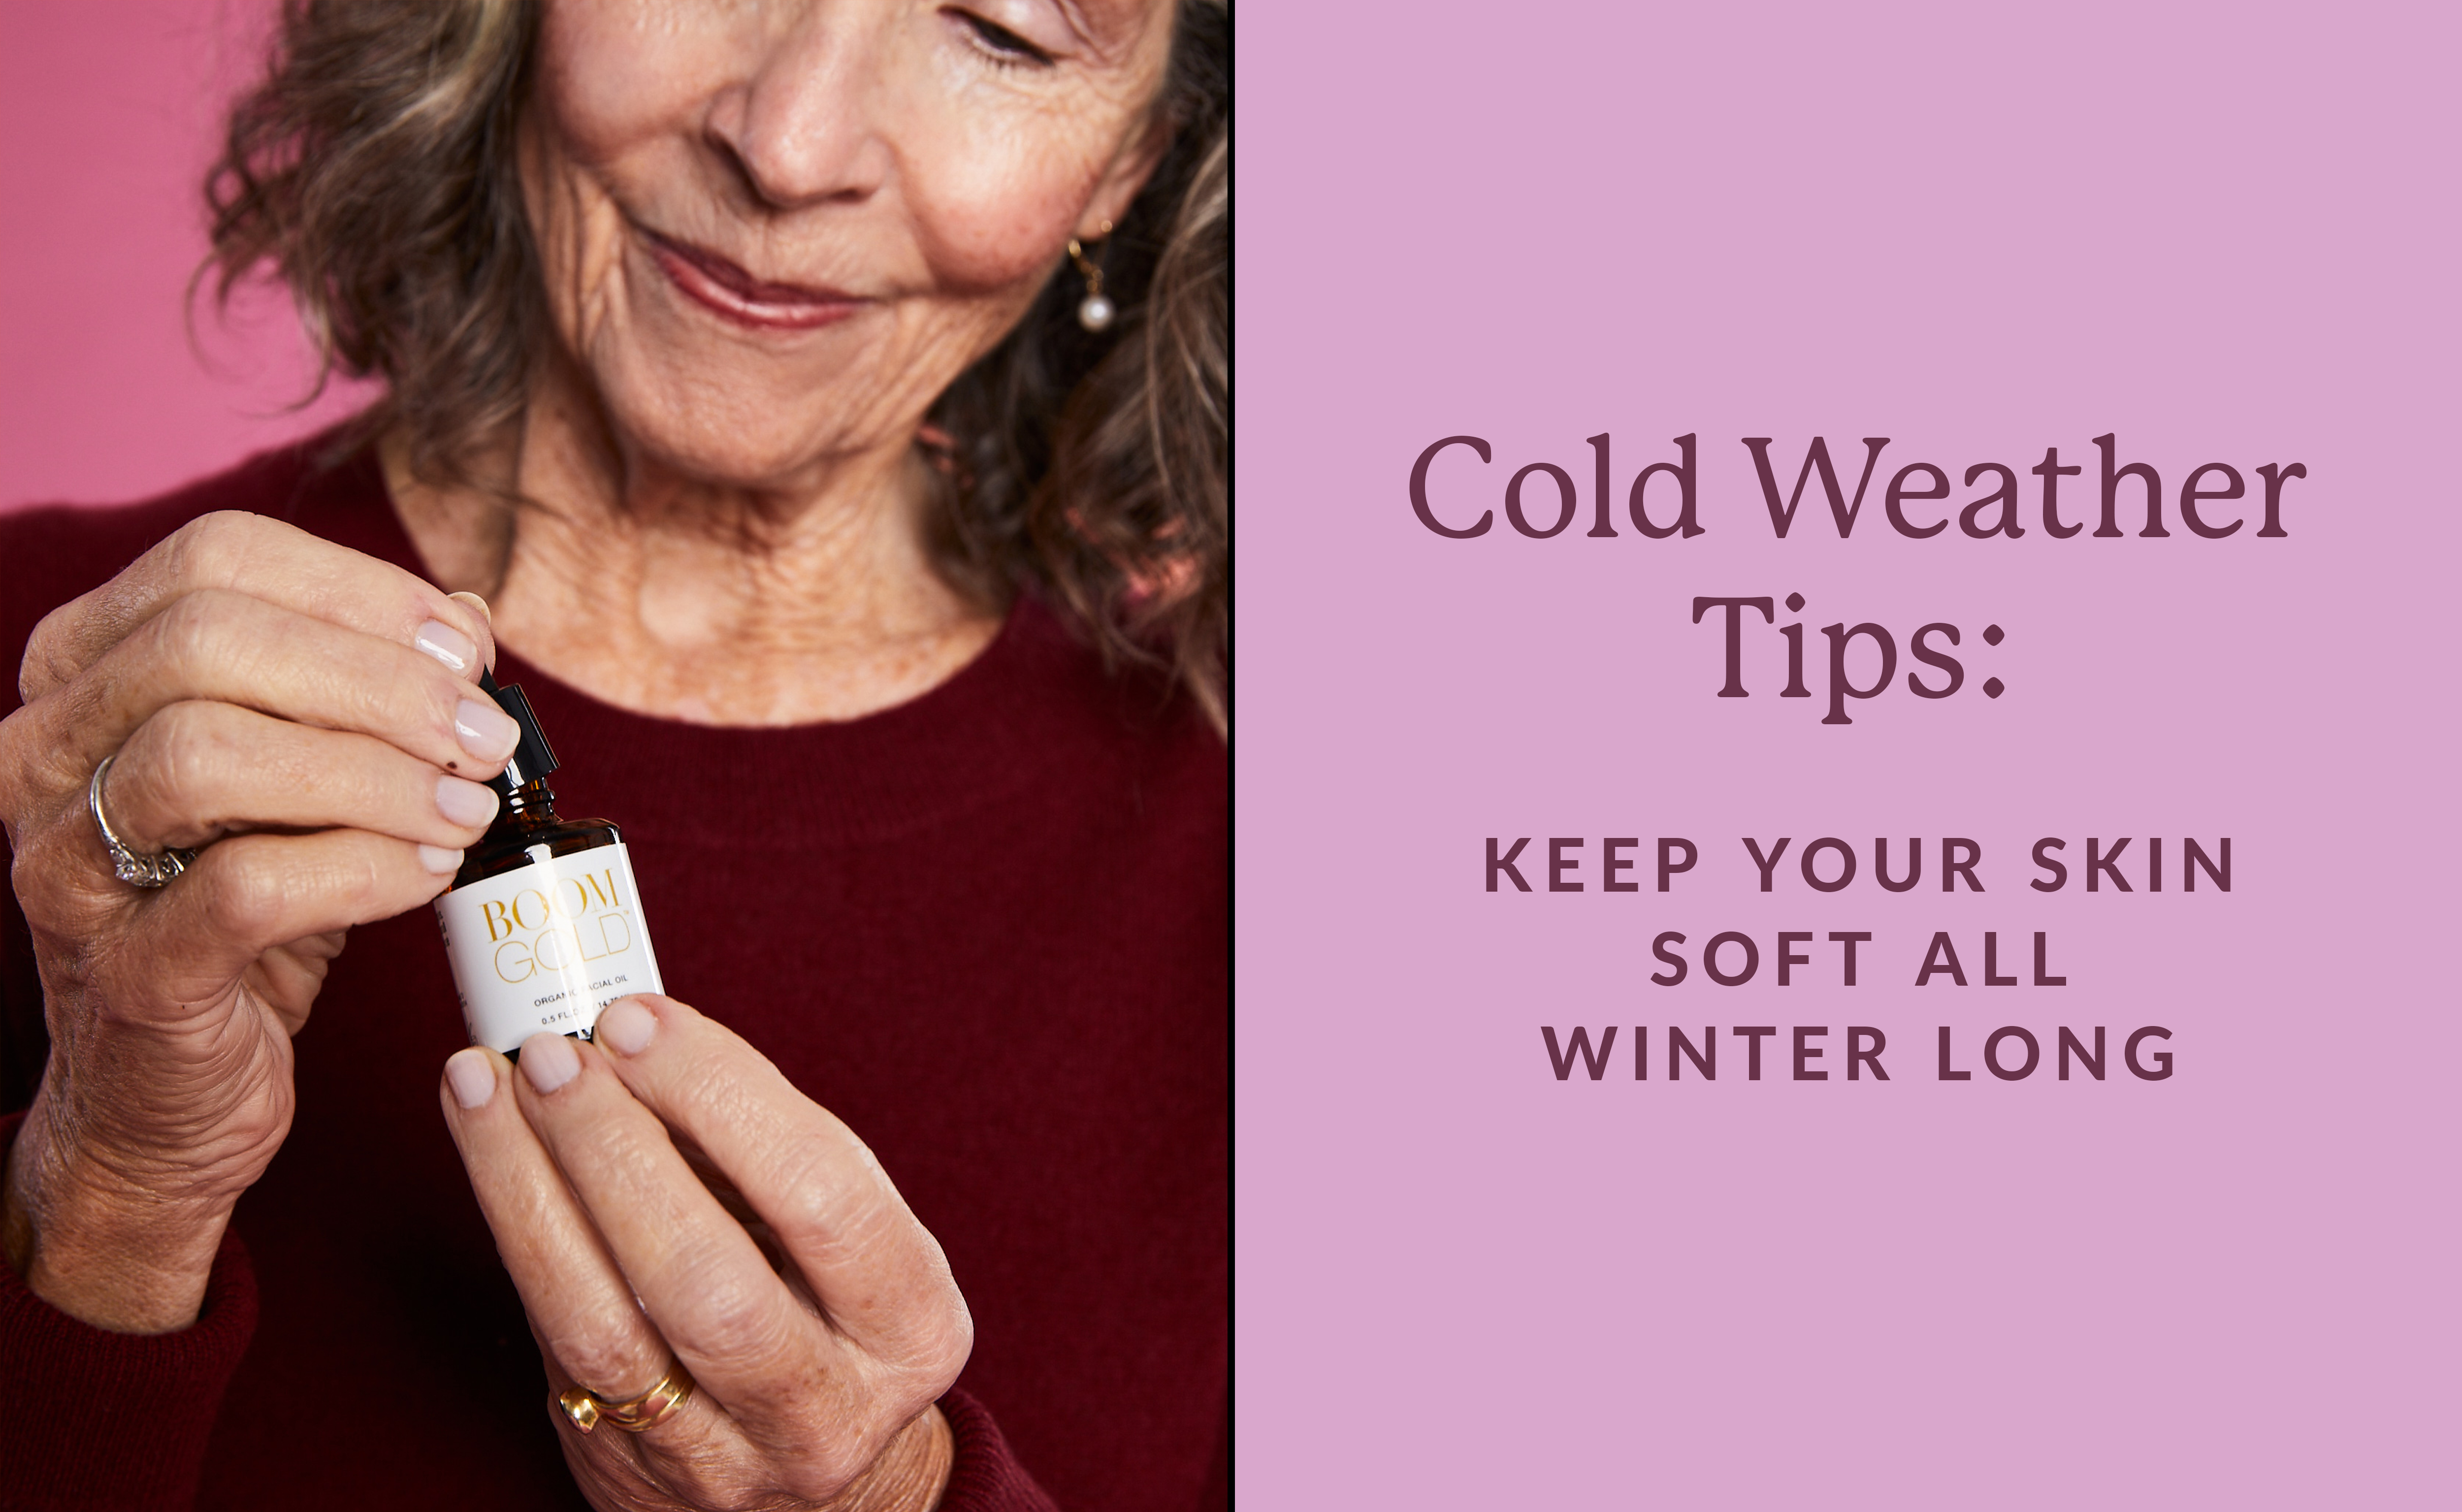 Cold Weather Tips: Keep your skin soft all winter long